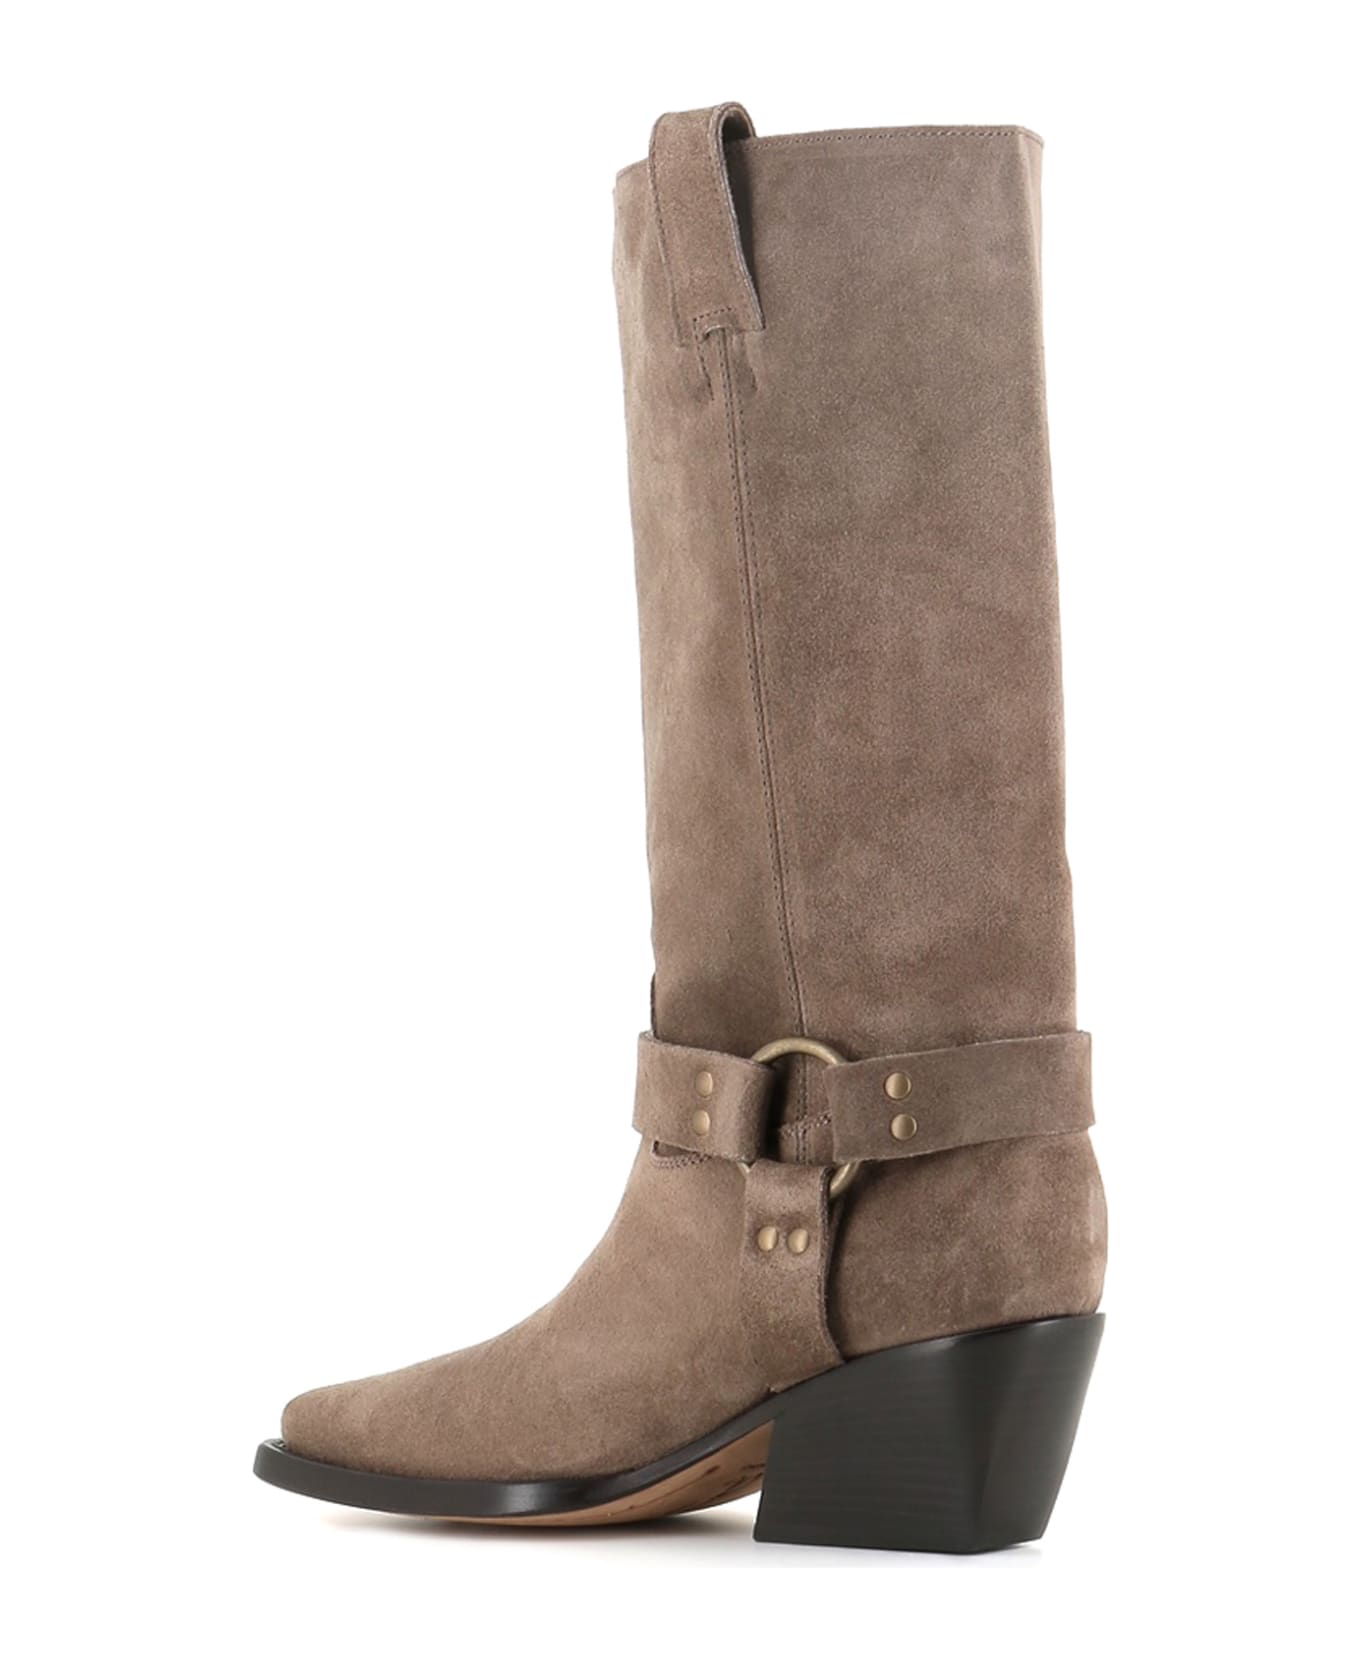 Paola D'Arcano Boot 4711 - Taupe ブーツ